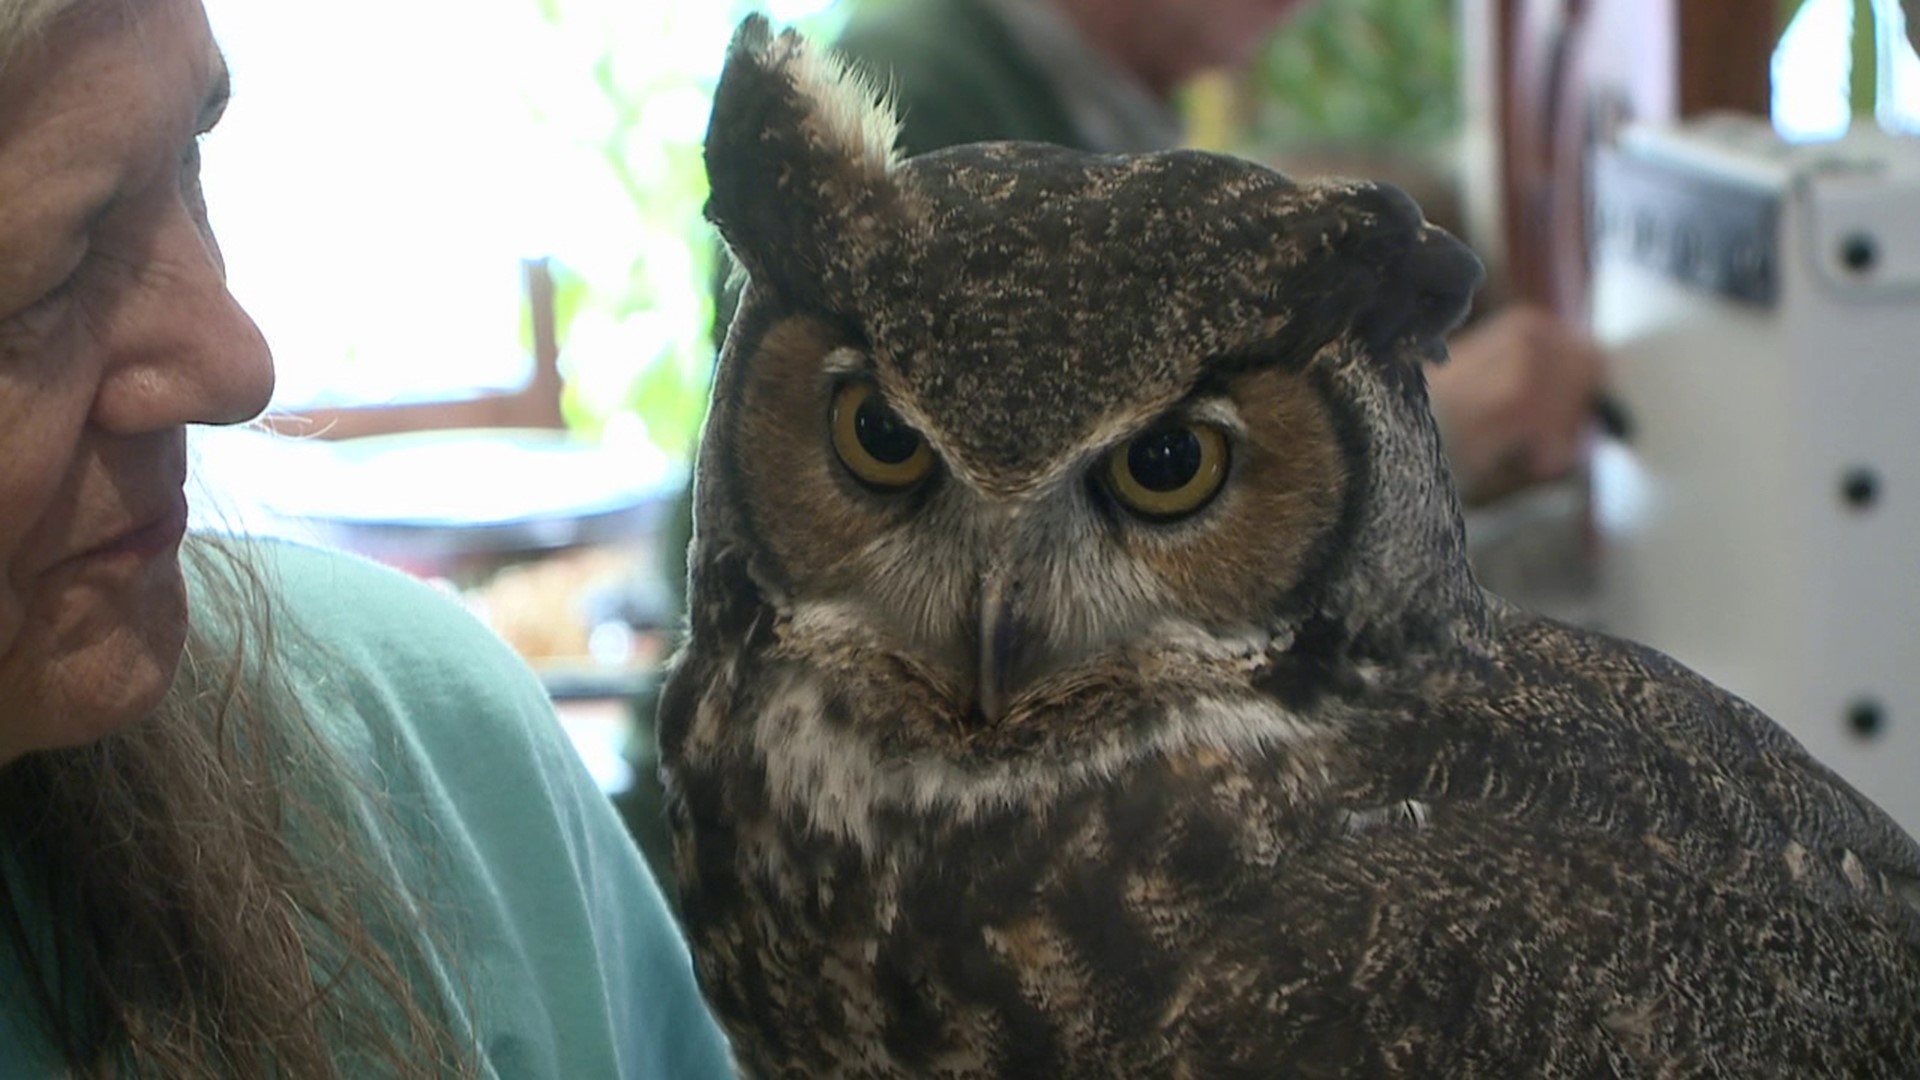 A wild birthday party was held Saturday as Gabriel, also known as Gabby, the owl who has served as the mascot for Red Creek Wildlife Center celebrated 30 years.